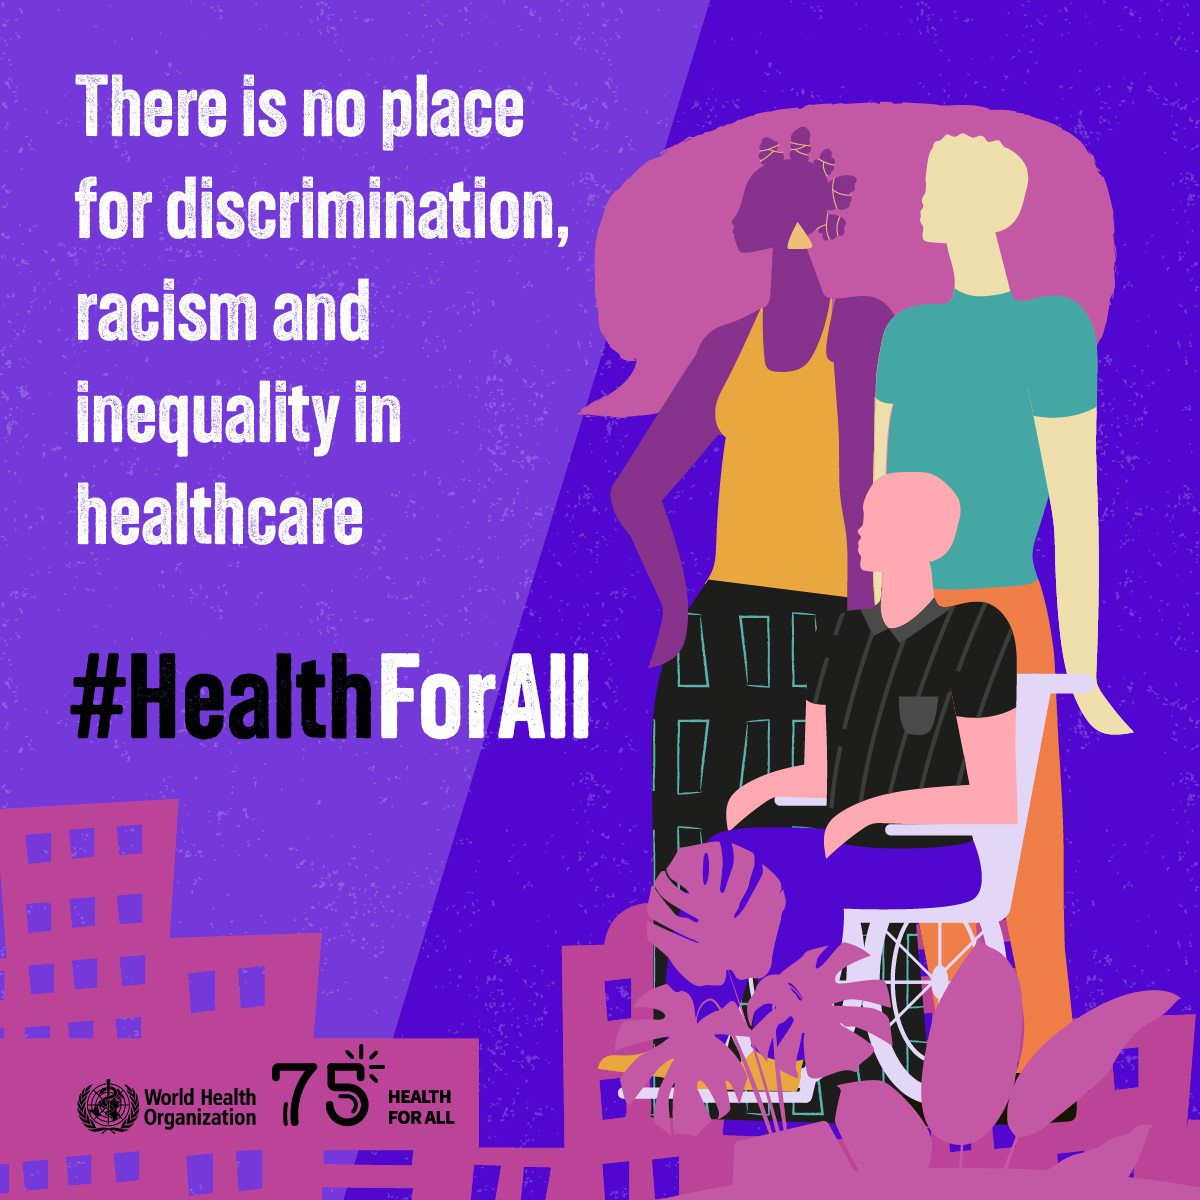 © World Health Organization - Gender, Rights and Equity - Diversity, Equity and Inclusion (GRE)